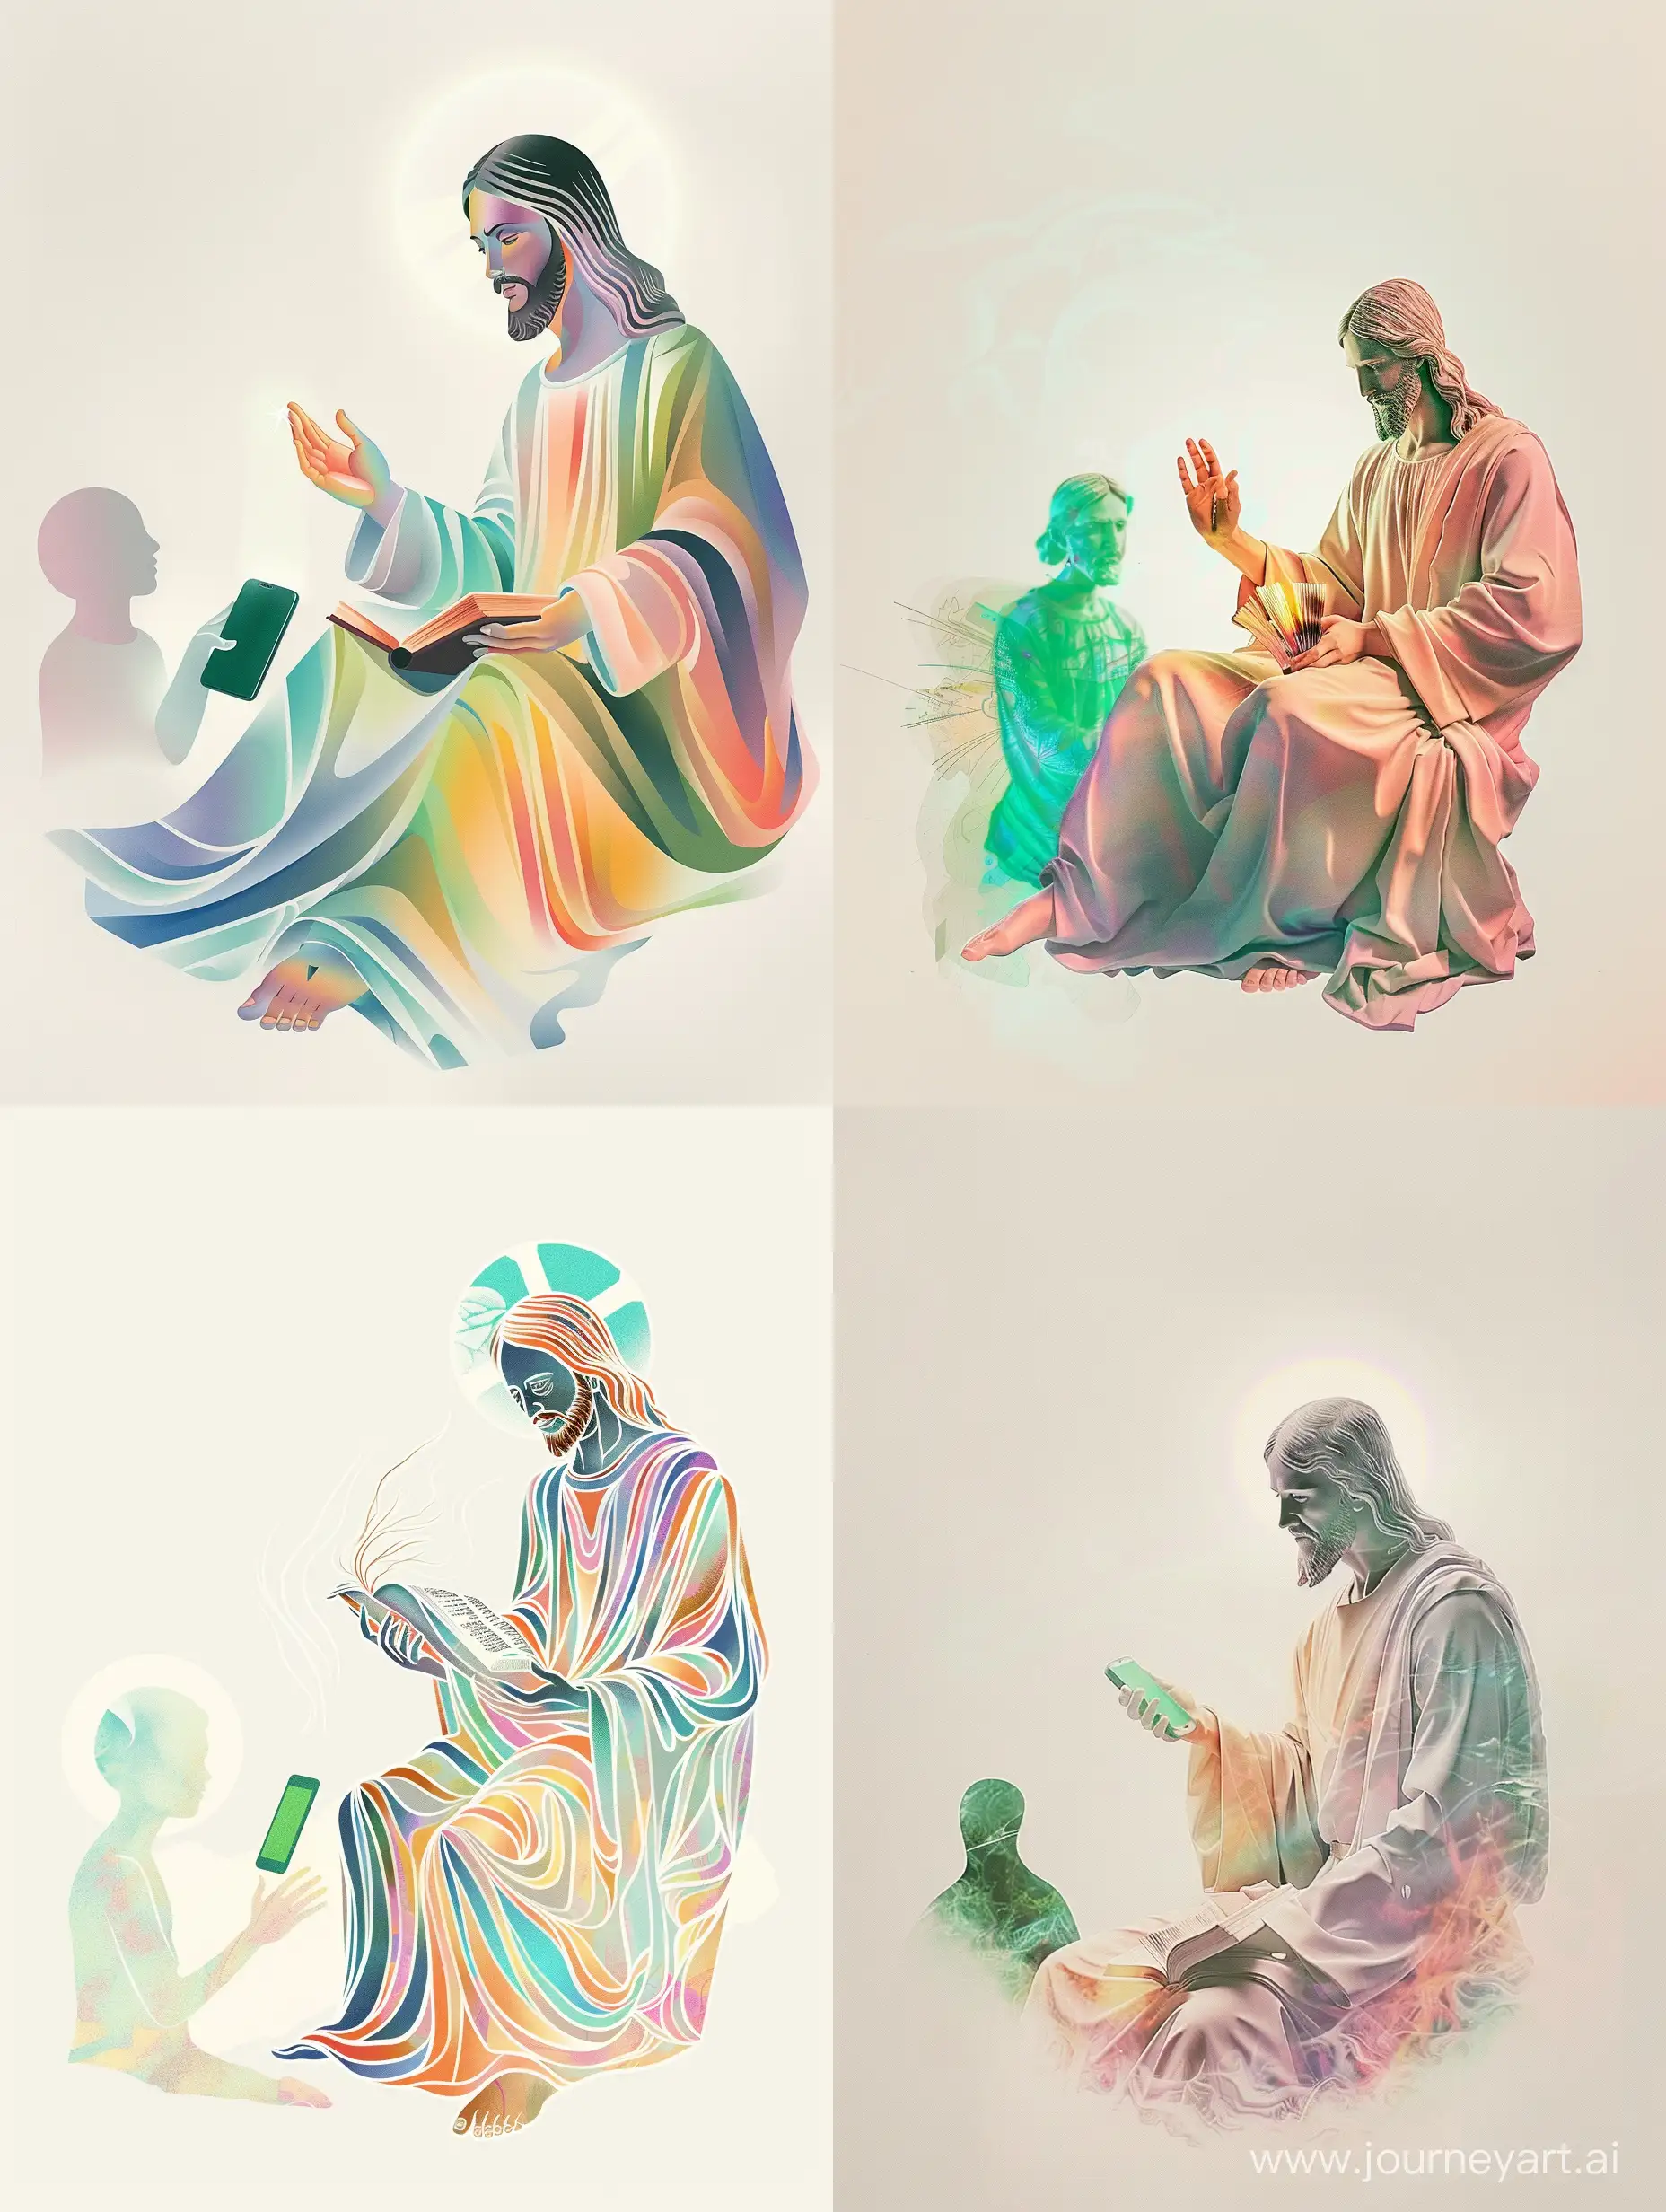 Modern-Depiction-of-Jesus-as-Therapist-with-Seeker-in-Soft-Hues